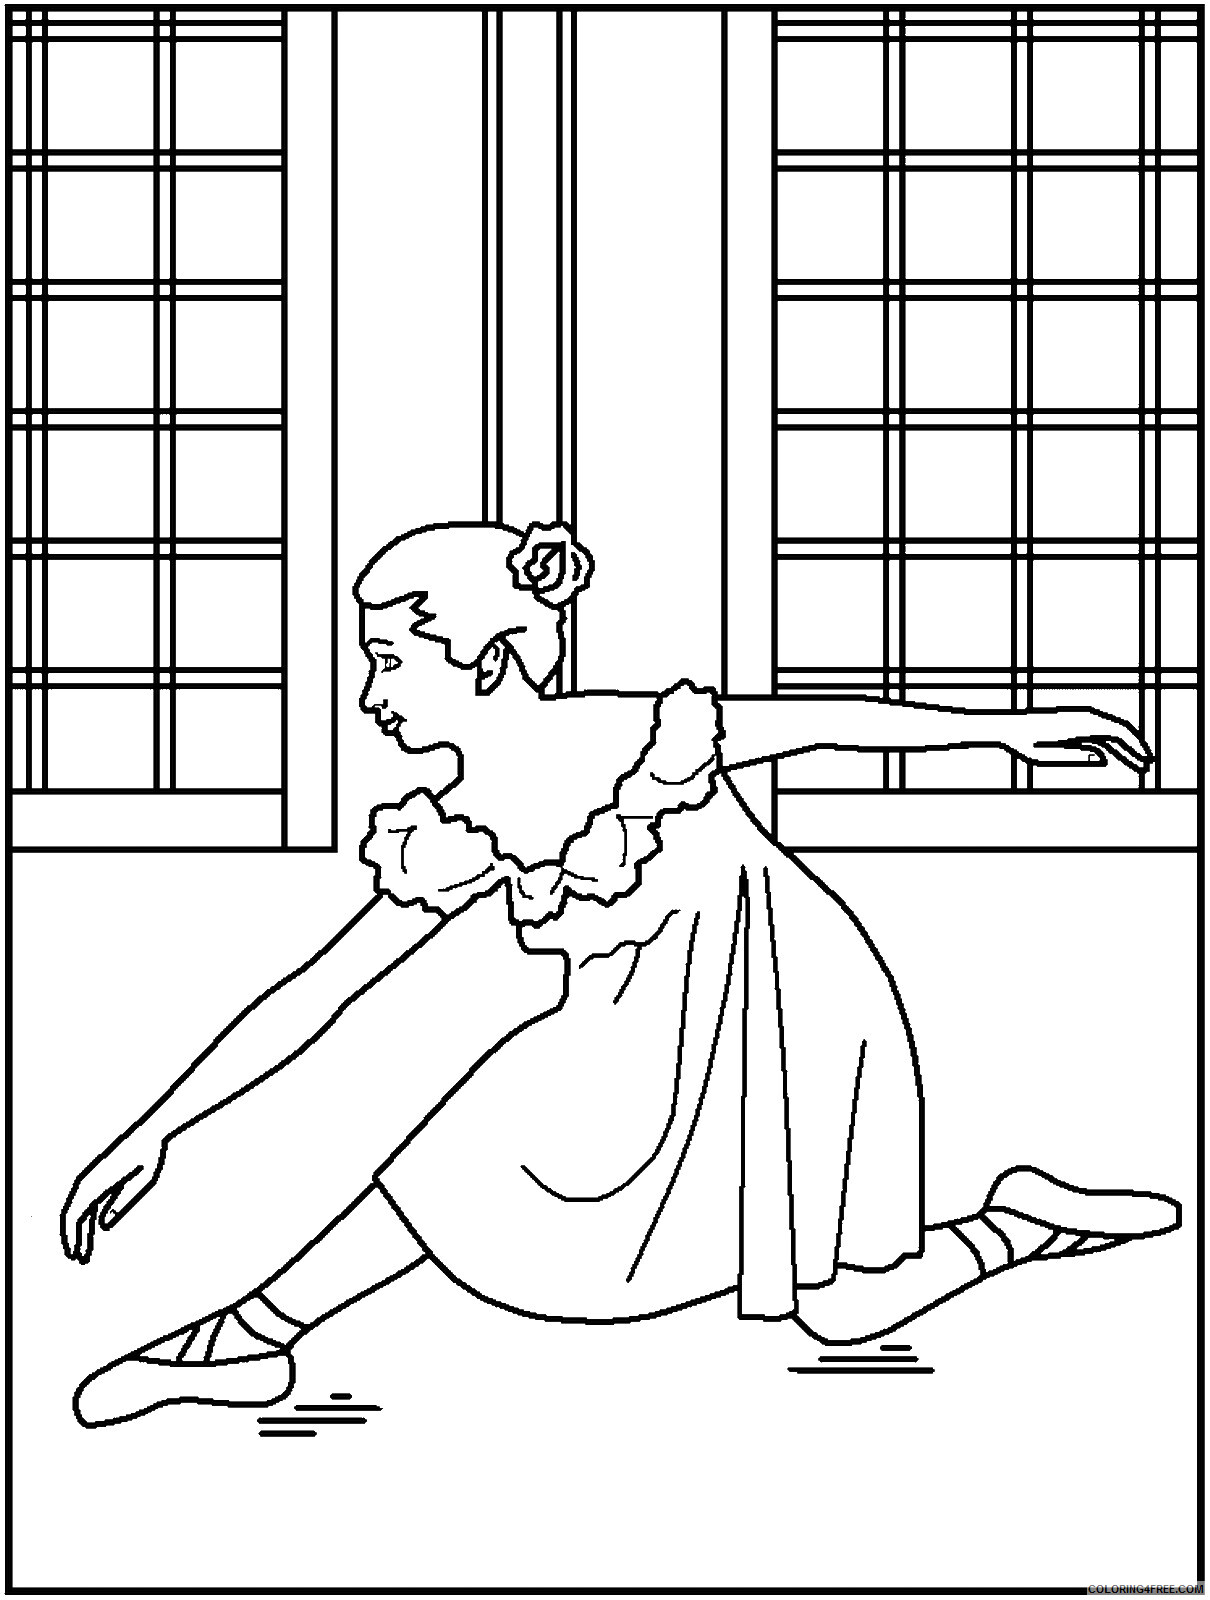 Ballerina Coloring Pages ballerinac50 Printable 2021 0484 Coloring4free